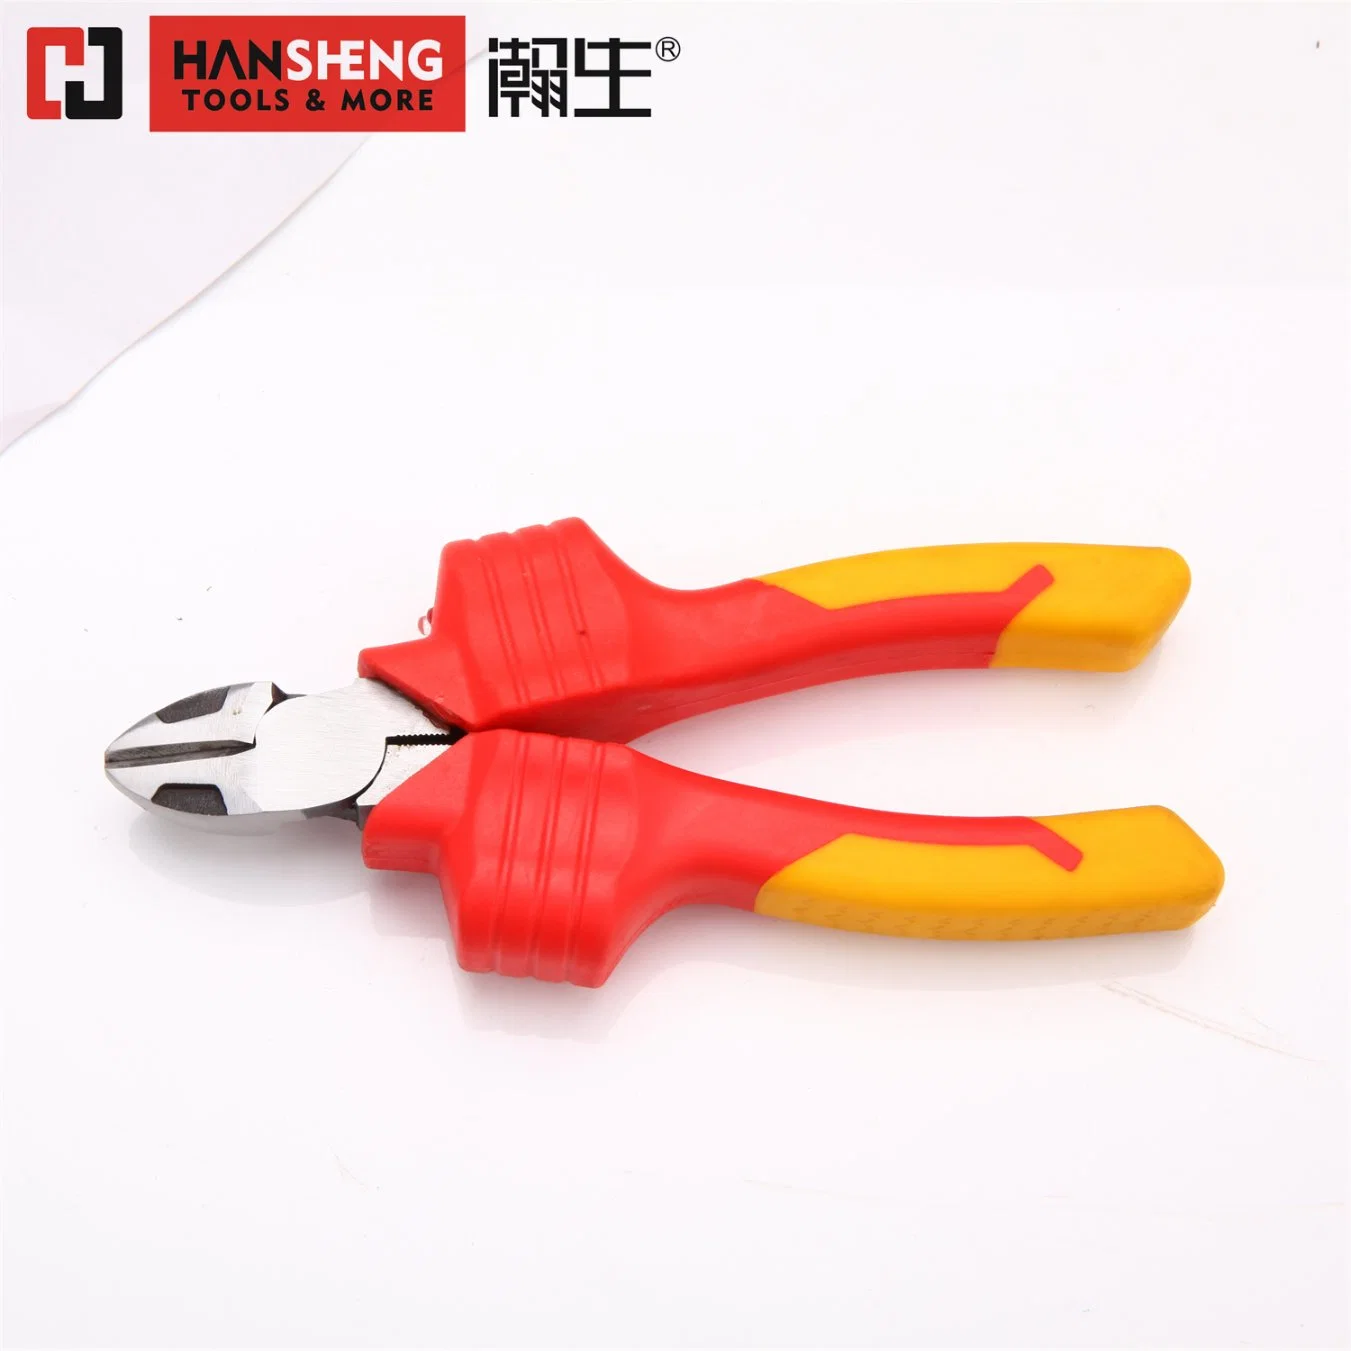 VDE Combination Pliers, Hand Tools, Hardware Tools, Cutting Tools, with 1000V Handle, Professional Hand Tool, Pliers, Insulating Tools